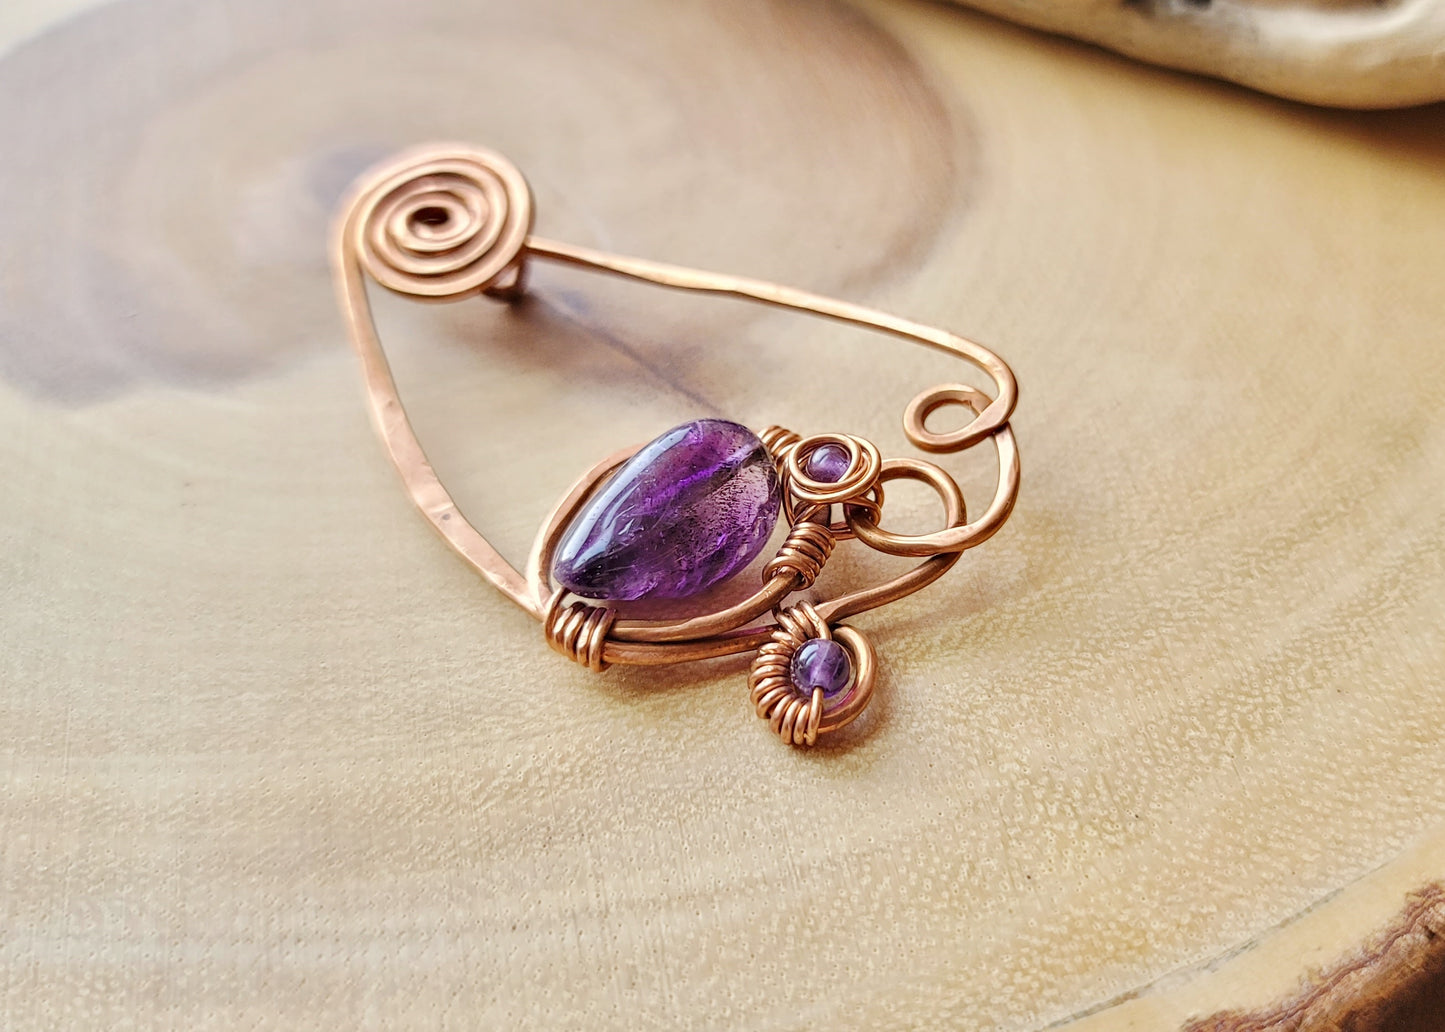 Celtic inspired Brooch / Kit Pin with repurposed, Upcycled Copper wire and natural Purple Amethyst